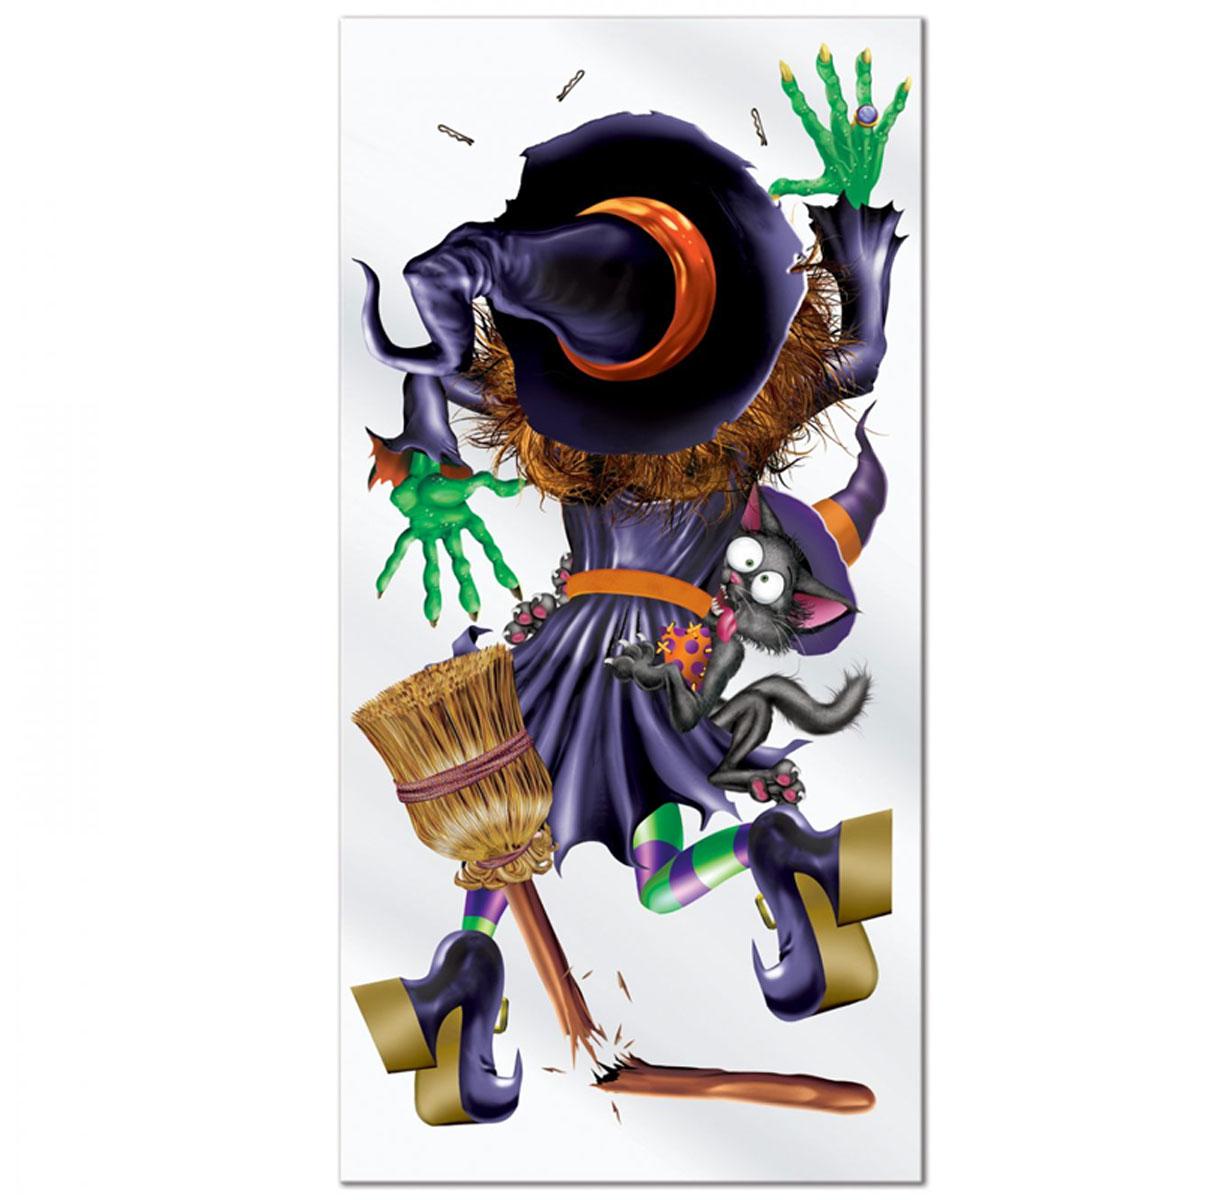 Crashing Witch Door Decoration 60" x 30" by Beistle 00015 available here at Karnival Costumes online Halloween party shop